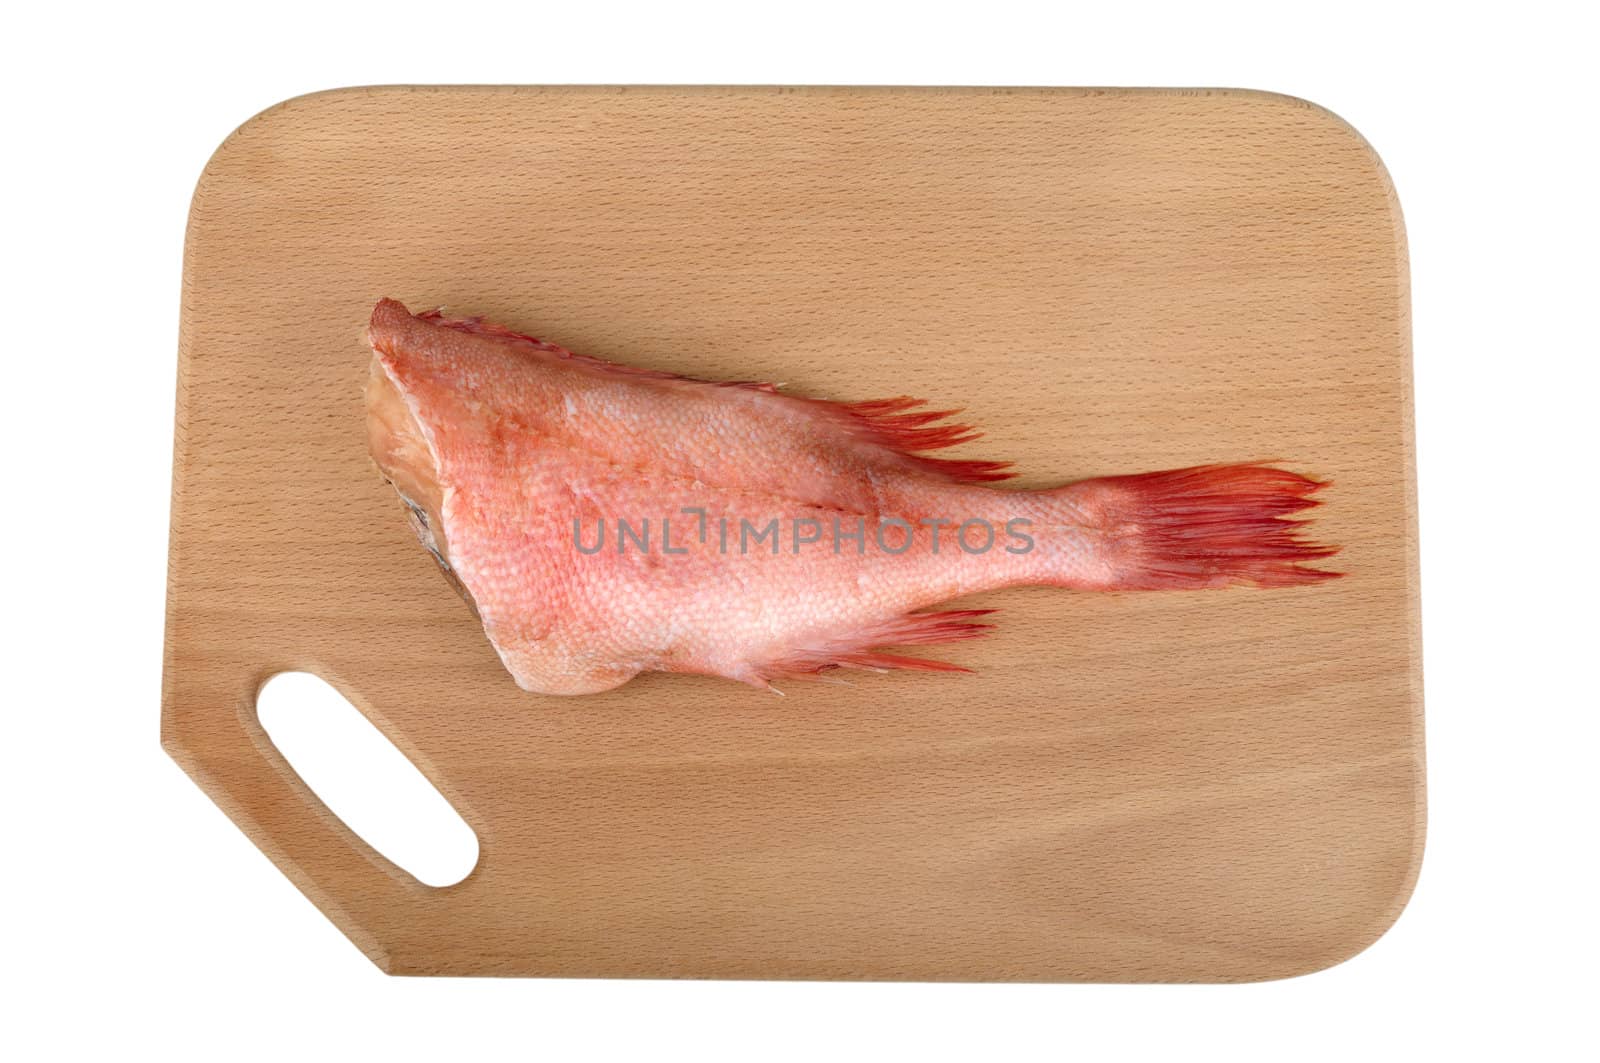 grouper on a wooden cutting board isolated on white background